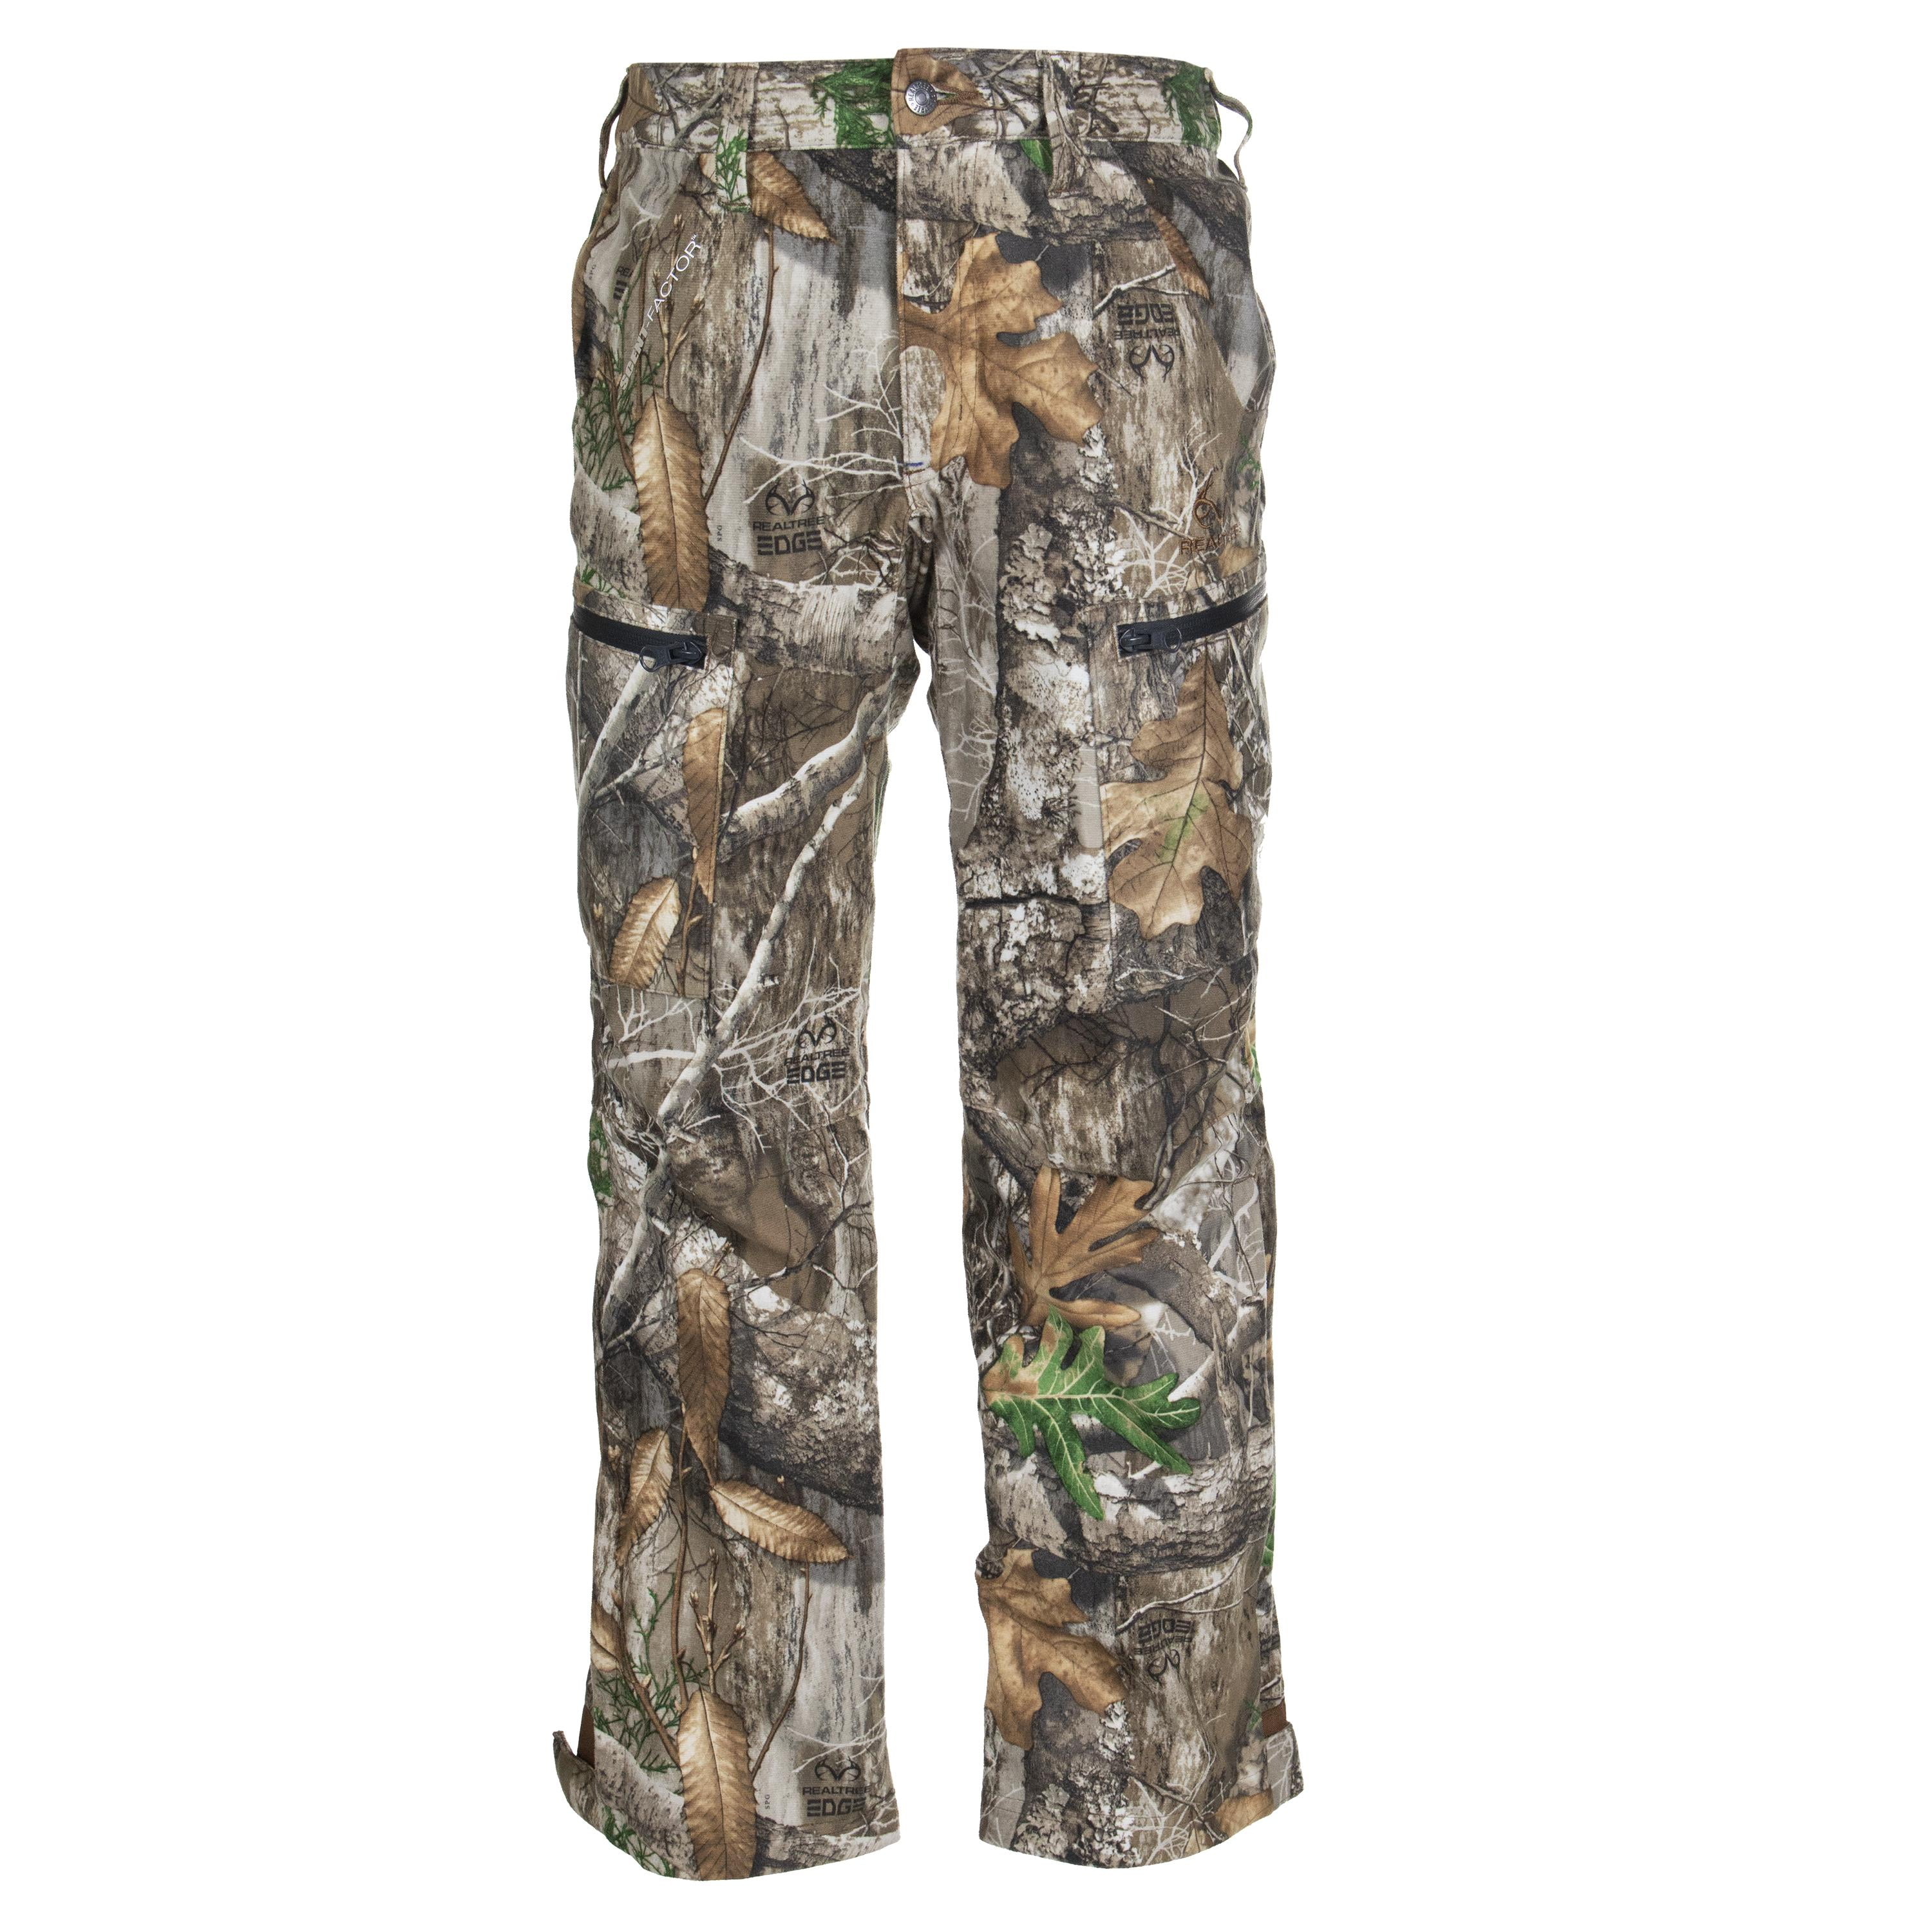 NEW BROWNING WASATCH CB PANTS REALTREE TIMBER CAMO 